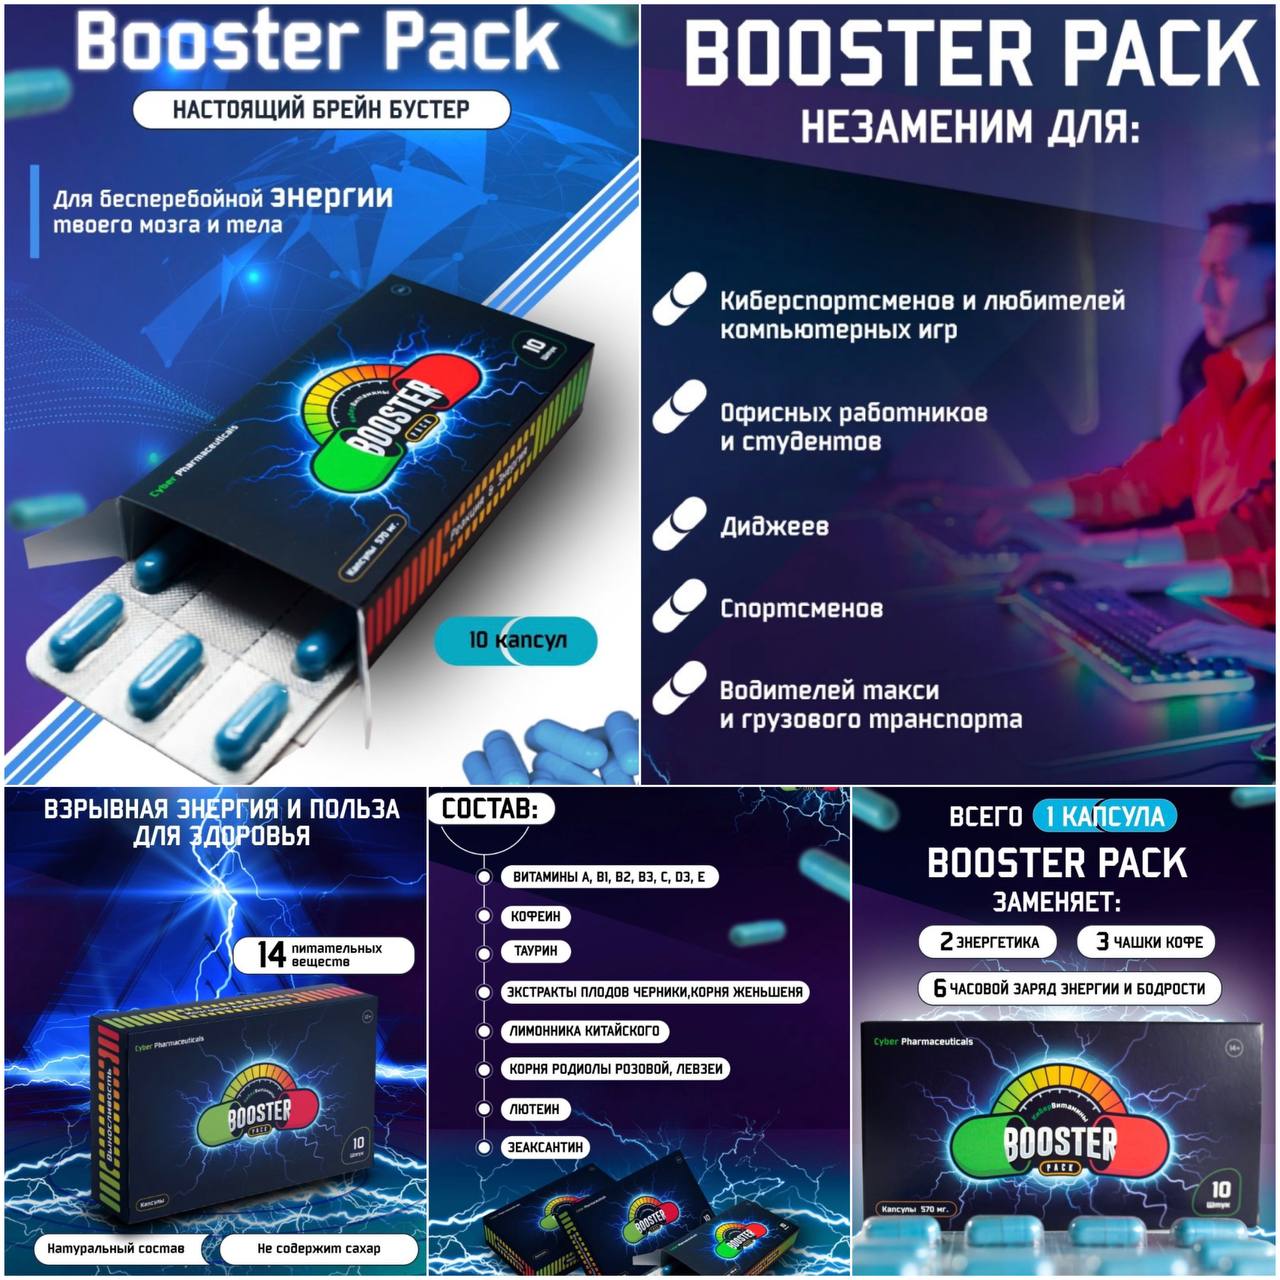 Steam booster packs фото 28